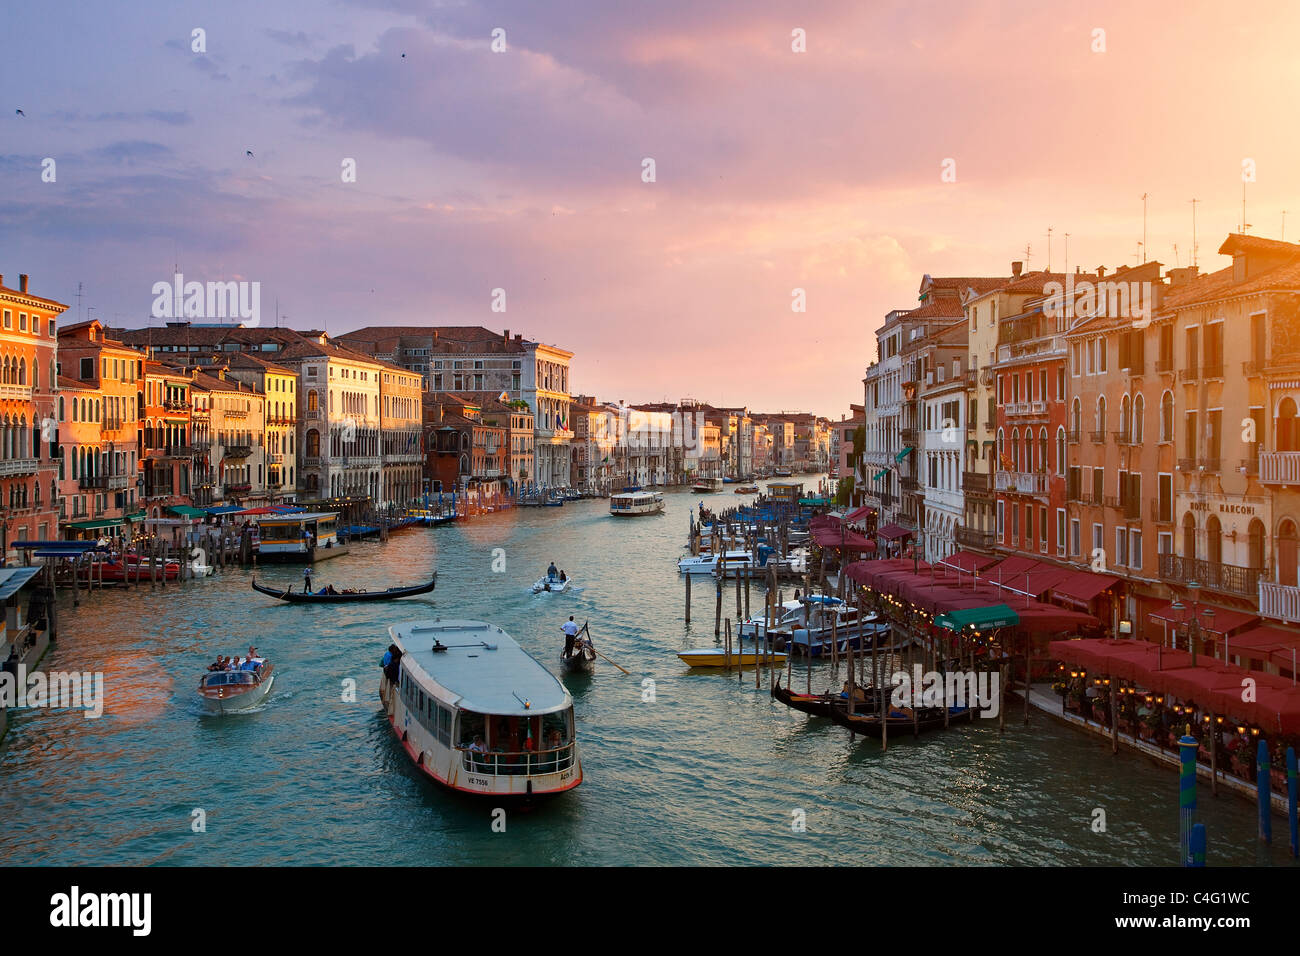 Venice, Grand Canal View from Rialto Bridge at Sunset Stock Photo